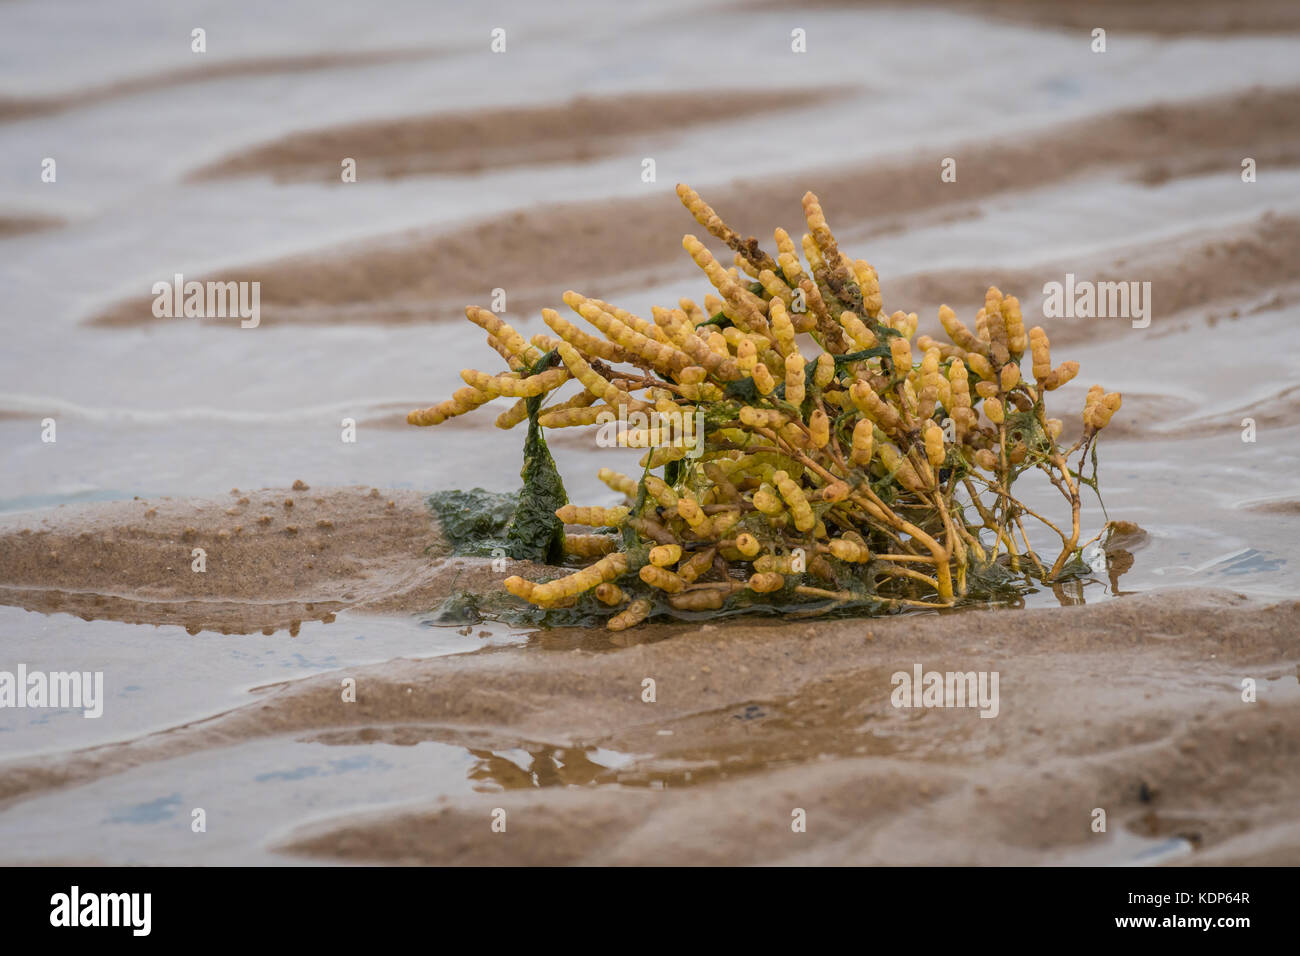 A samphire plant growing on the beach in the sand exposed with the tide out and seaweed on the stem Stock Photo